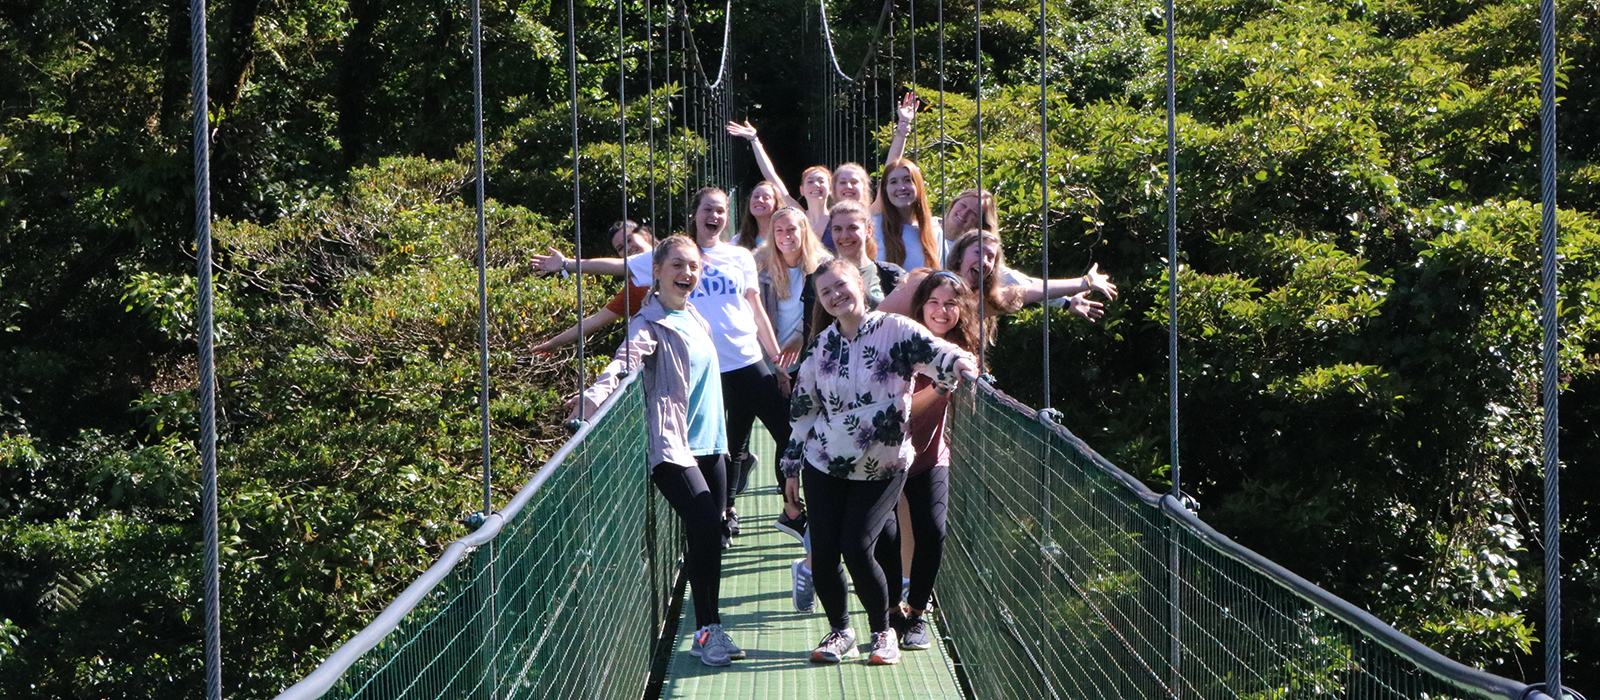 Husker students pose for a photo on a suspension bridge in Costa Rica